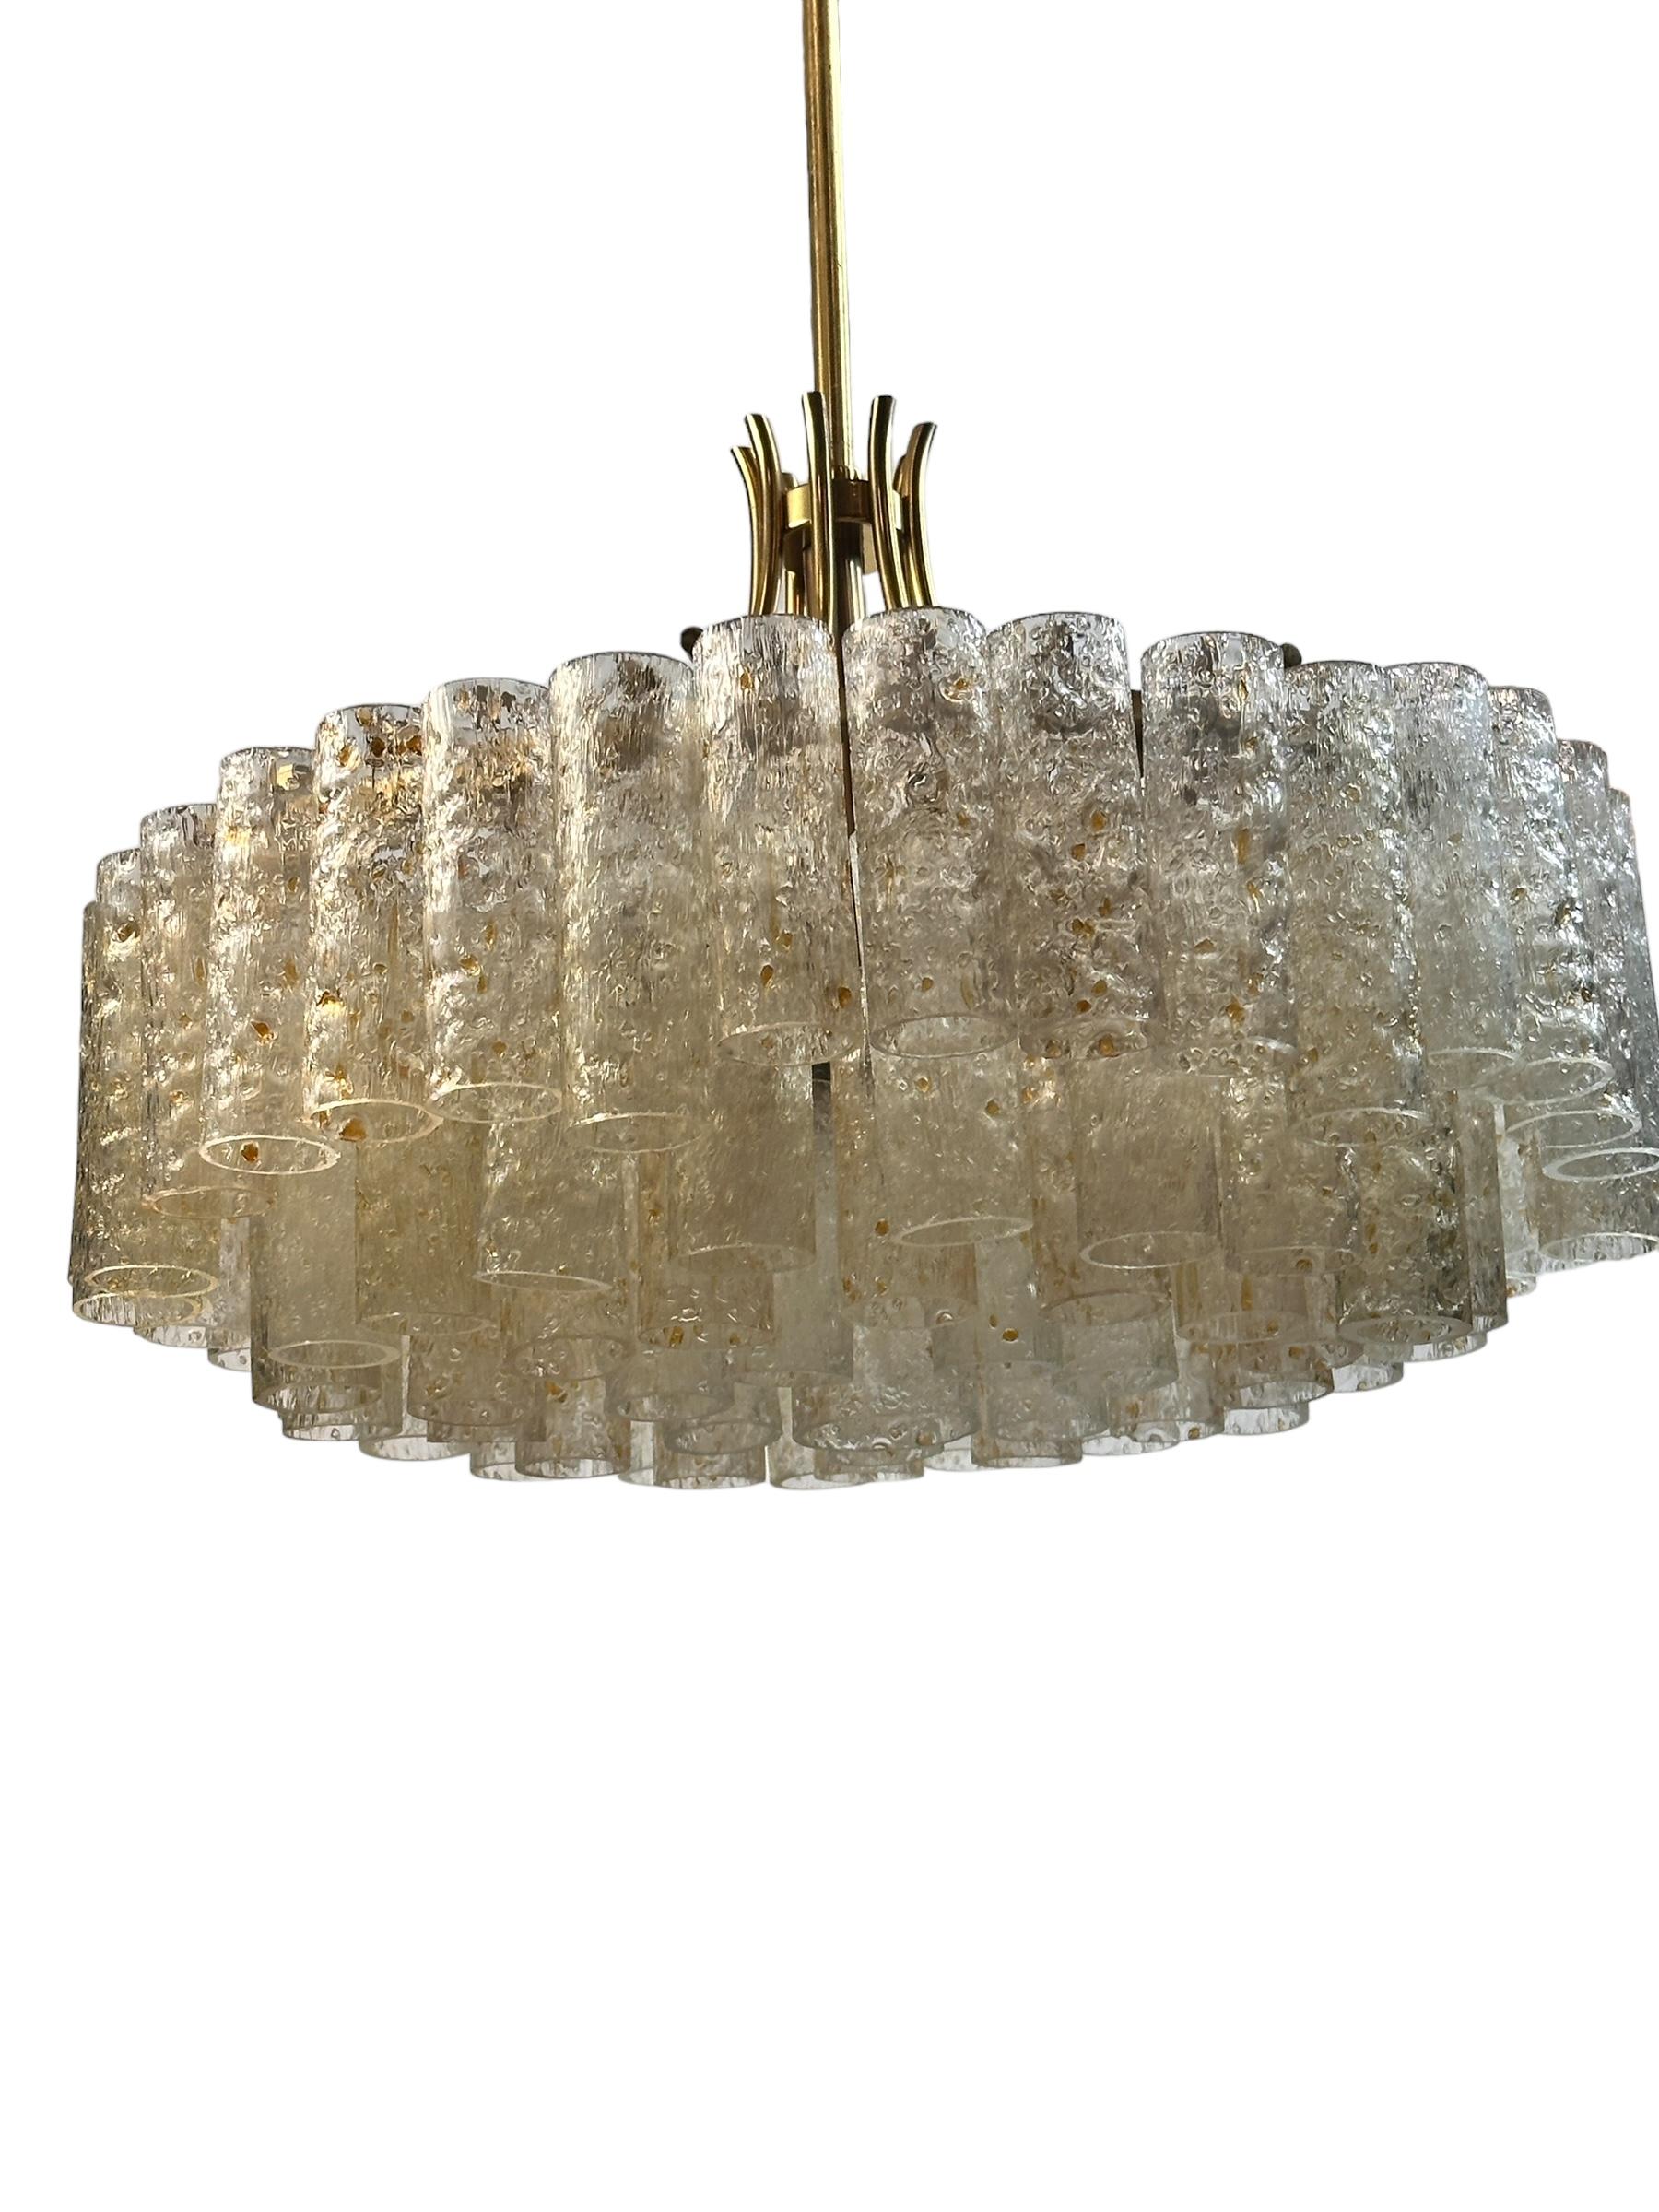 Mid-Century Modern Large Five - Tier Glass Tube Chandelier by Doria Leuchten, Germany, 1960s For Sale